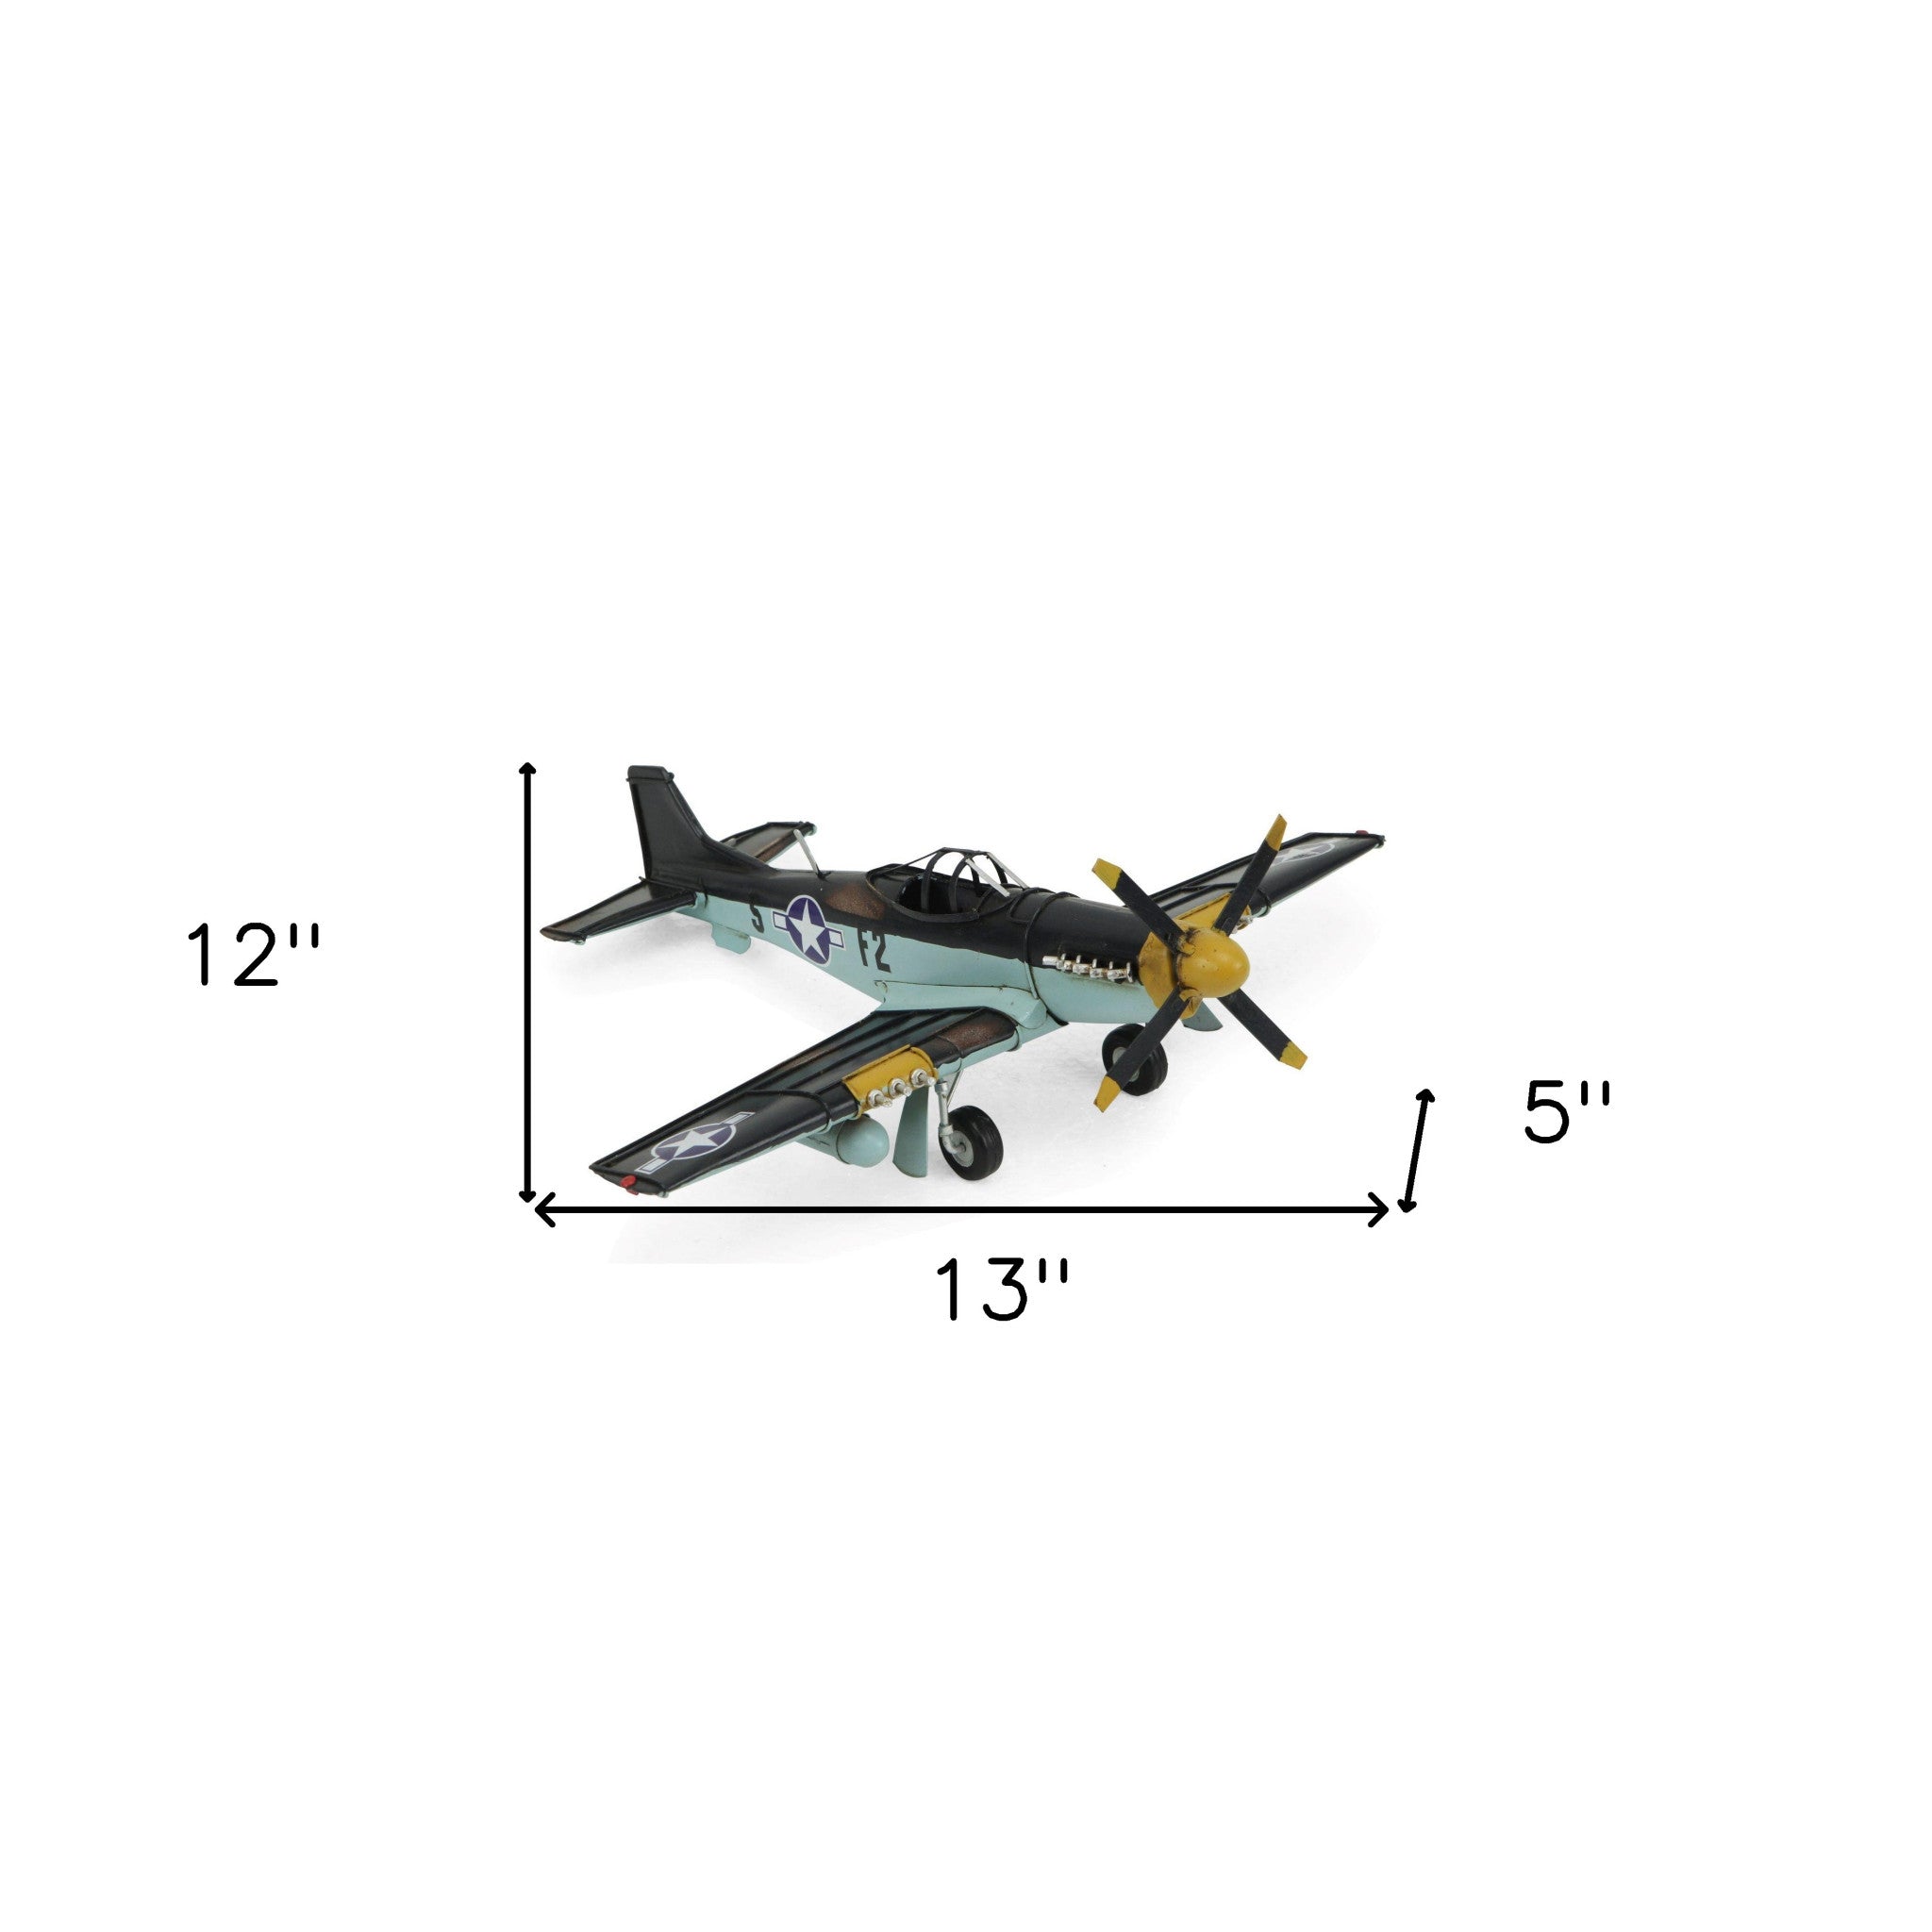 5" Black and Yellow Metal Hand Painted Model Airplane